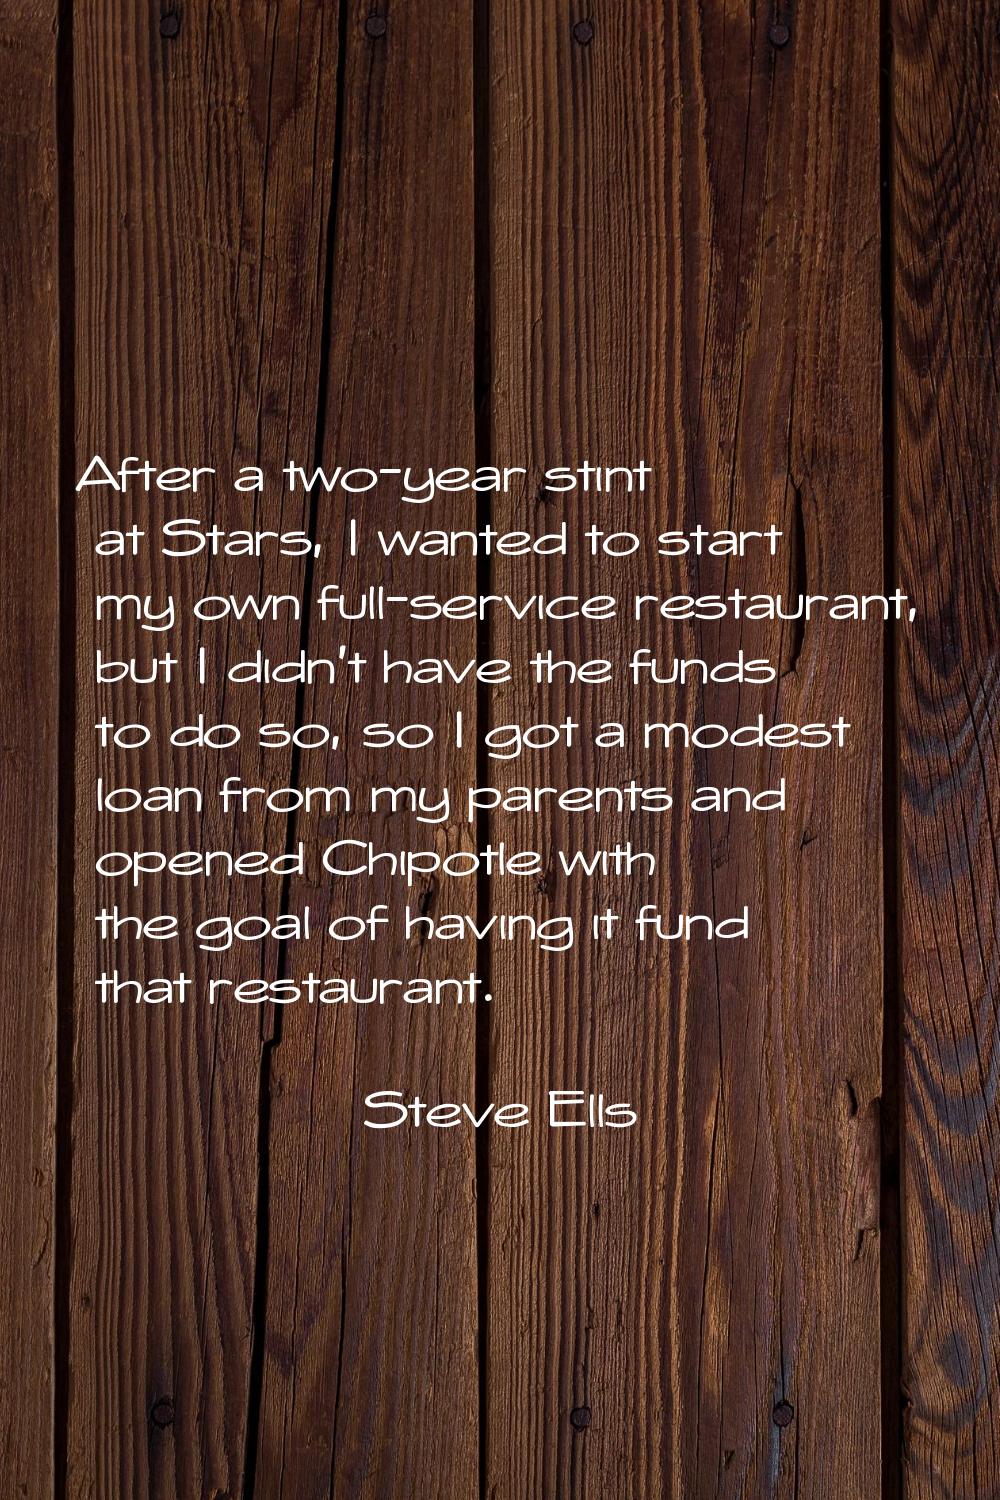 After a two-year stint at Stars, I wanted to start my own full-service restaurant, but I didn't hav